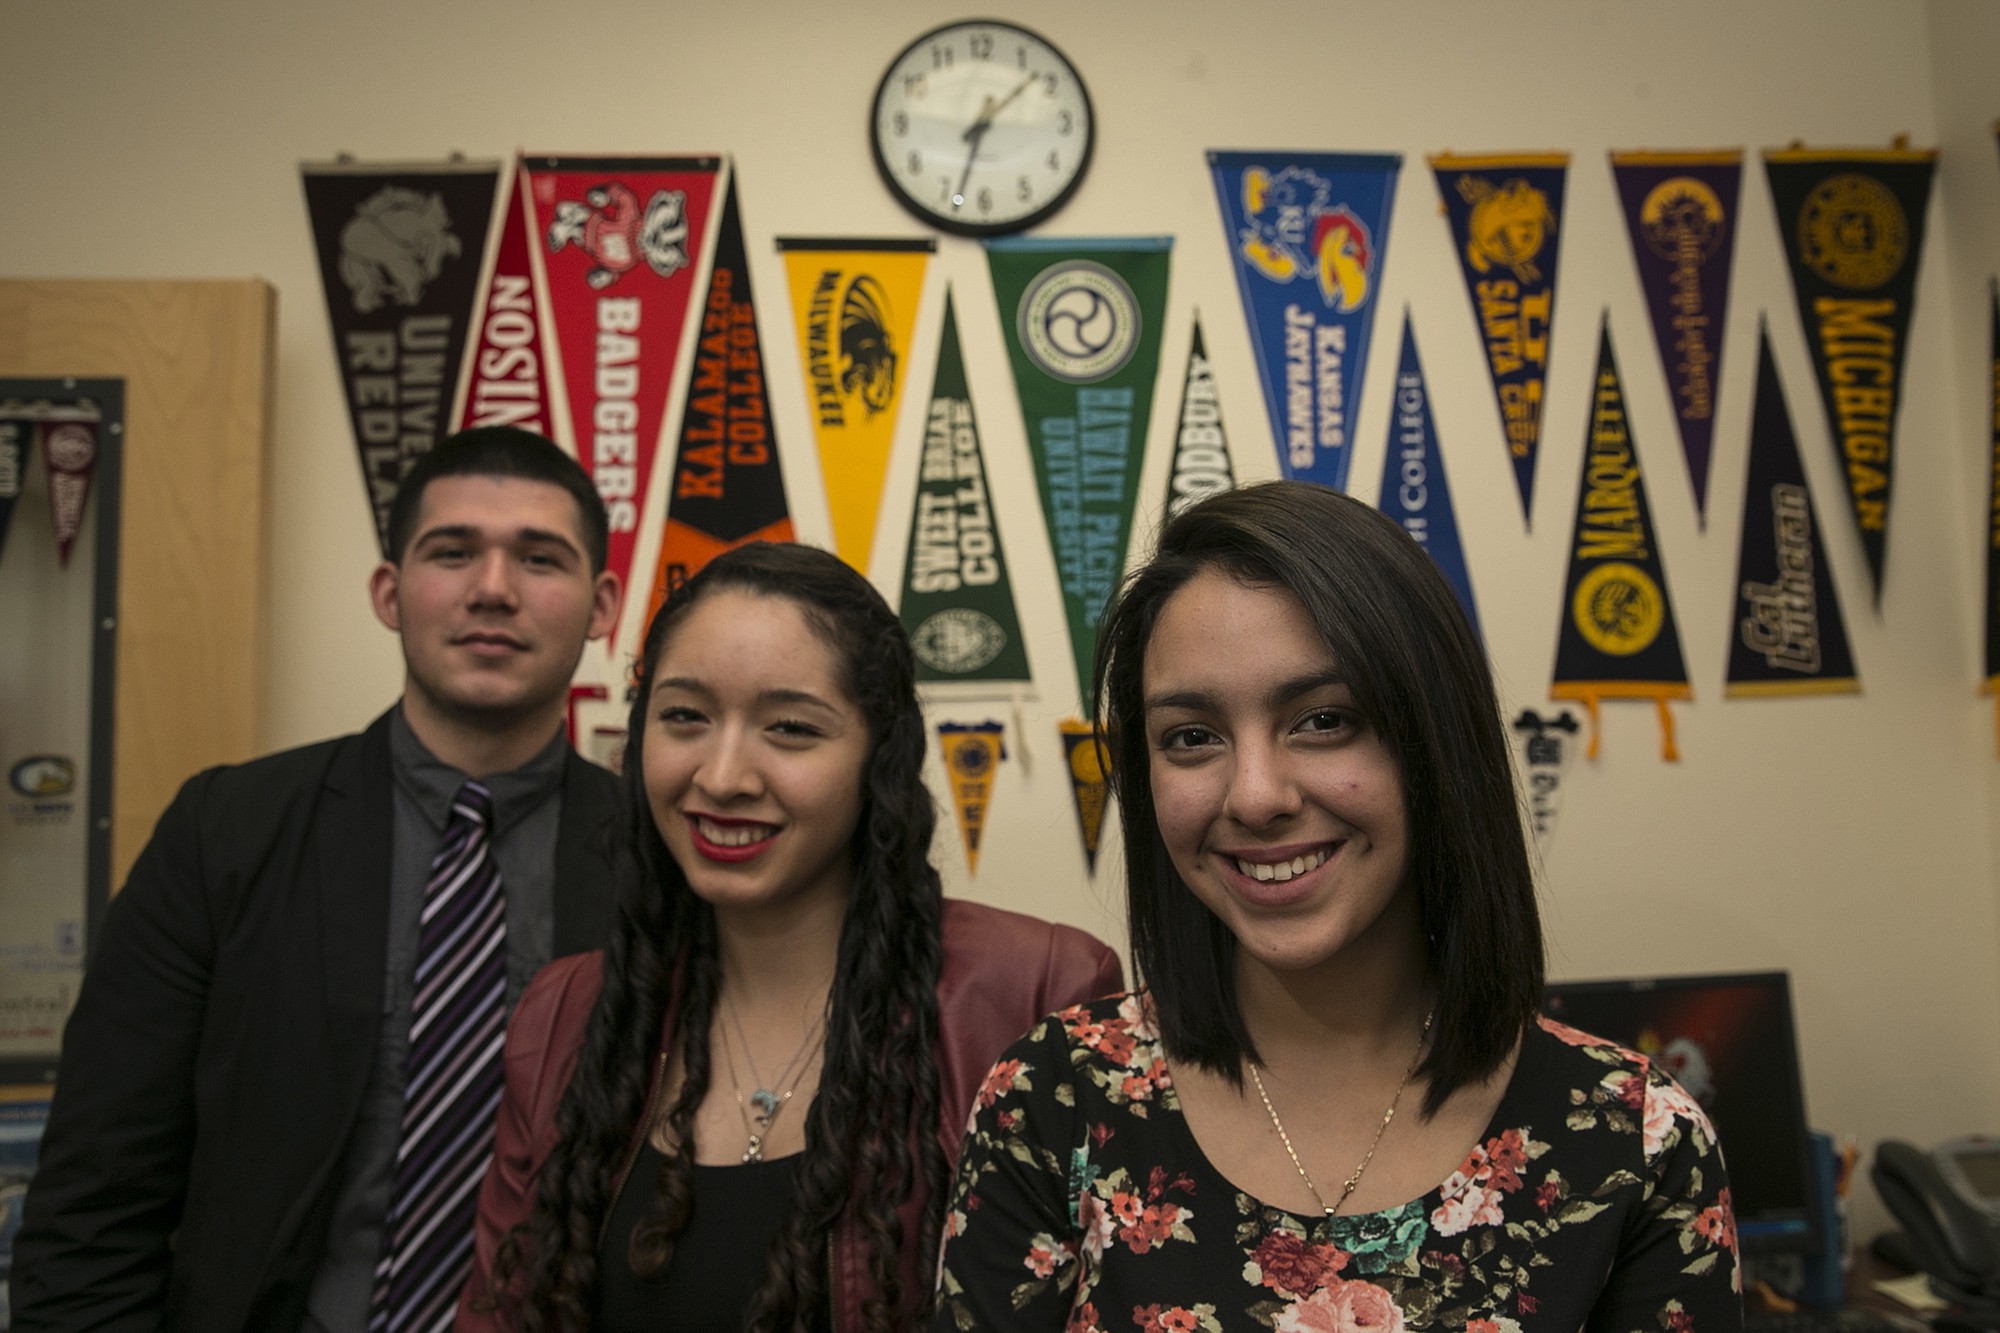 College-bound Arleta High School seniors Marc Ruelas, 17, Jazmin Vaiz, 17, and Faviola Saucedo, 18, of Los Angeles participated in early admission programs that allow students to apply for colleges early -- usually in November -- and receive an early decision.